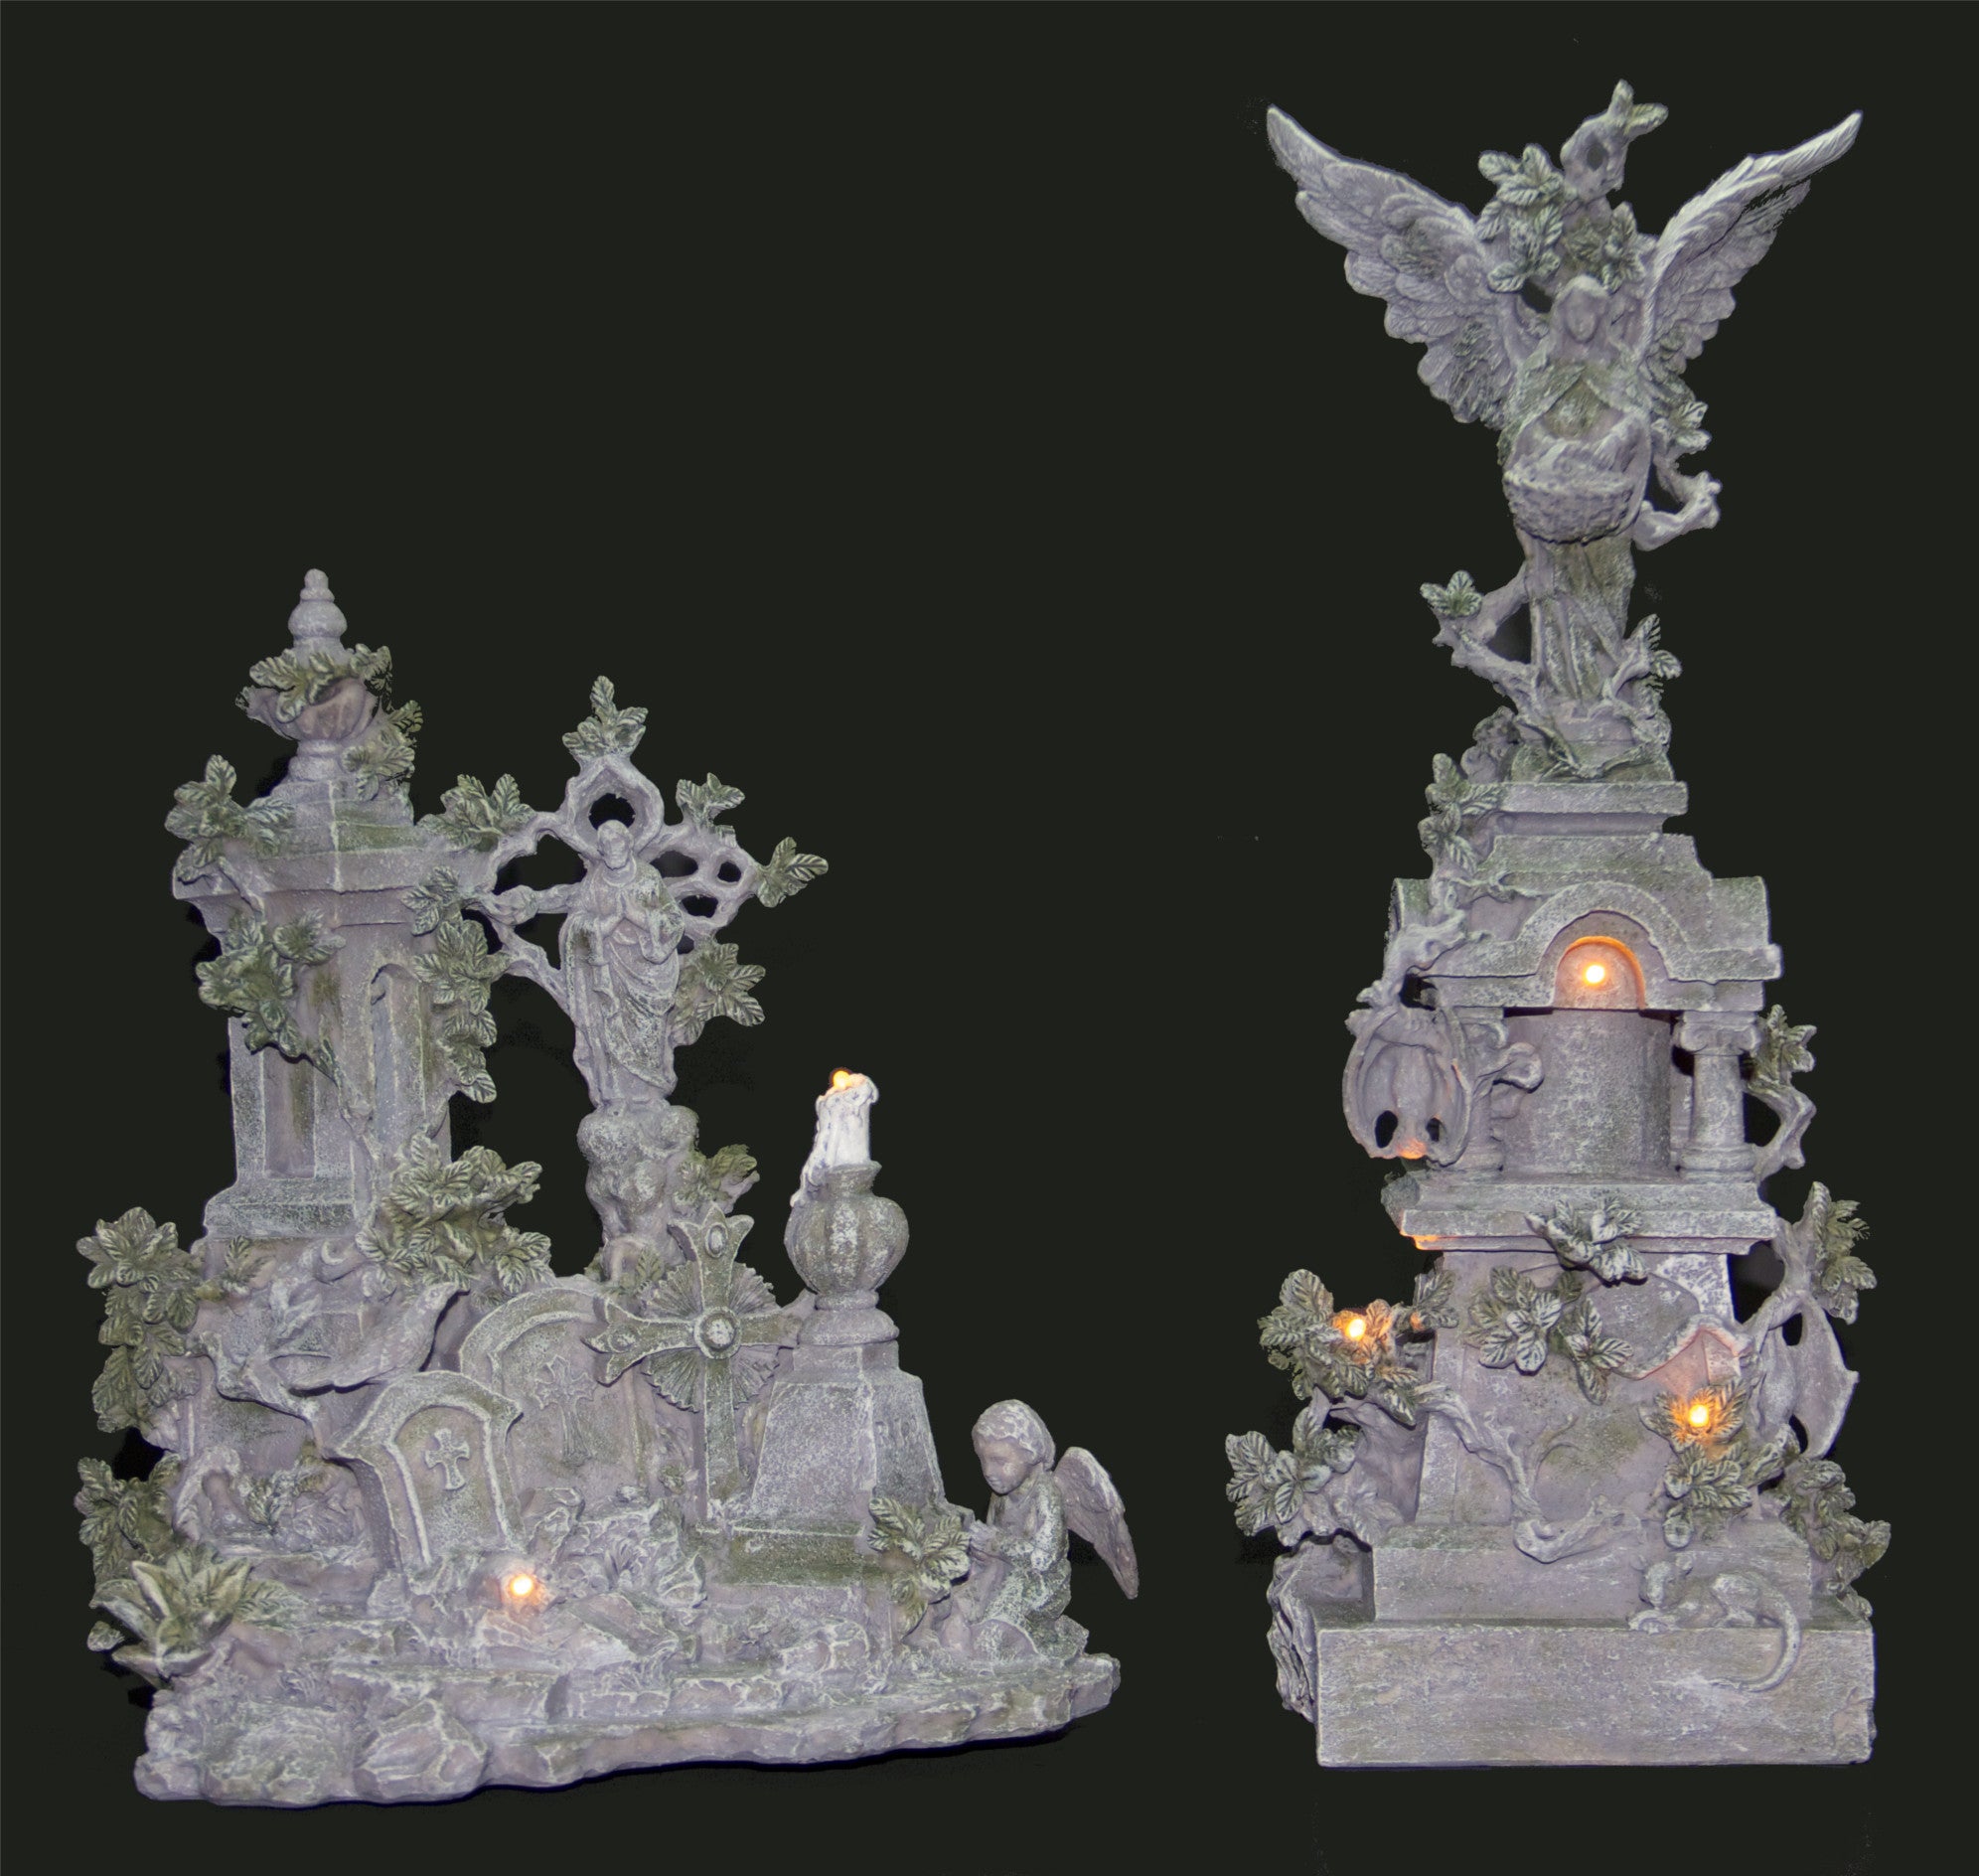 Haunted Cemetery with Angel Figurines - Graveyard